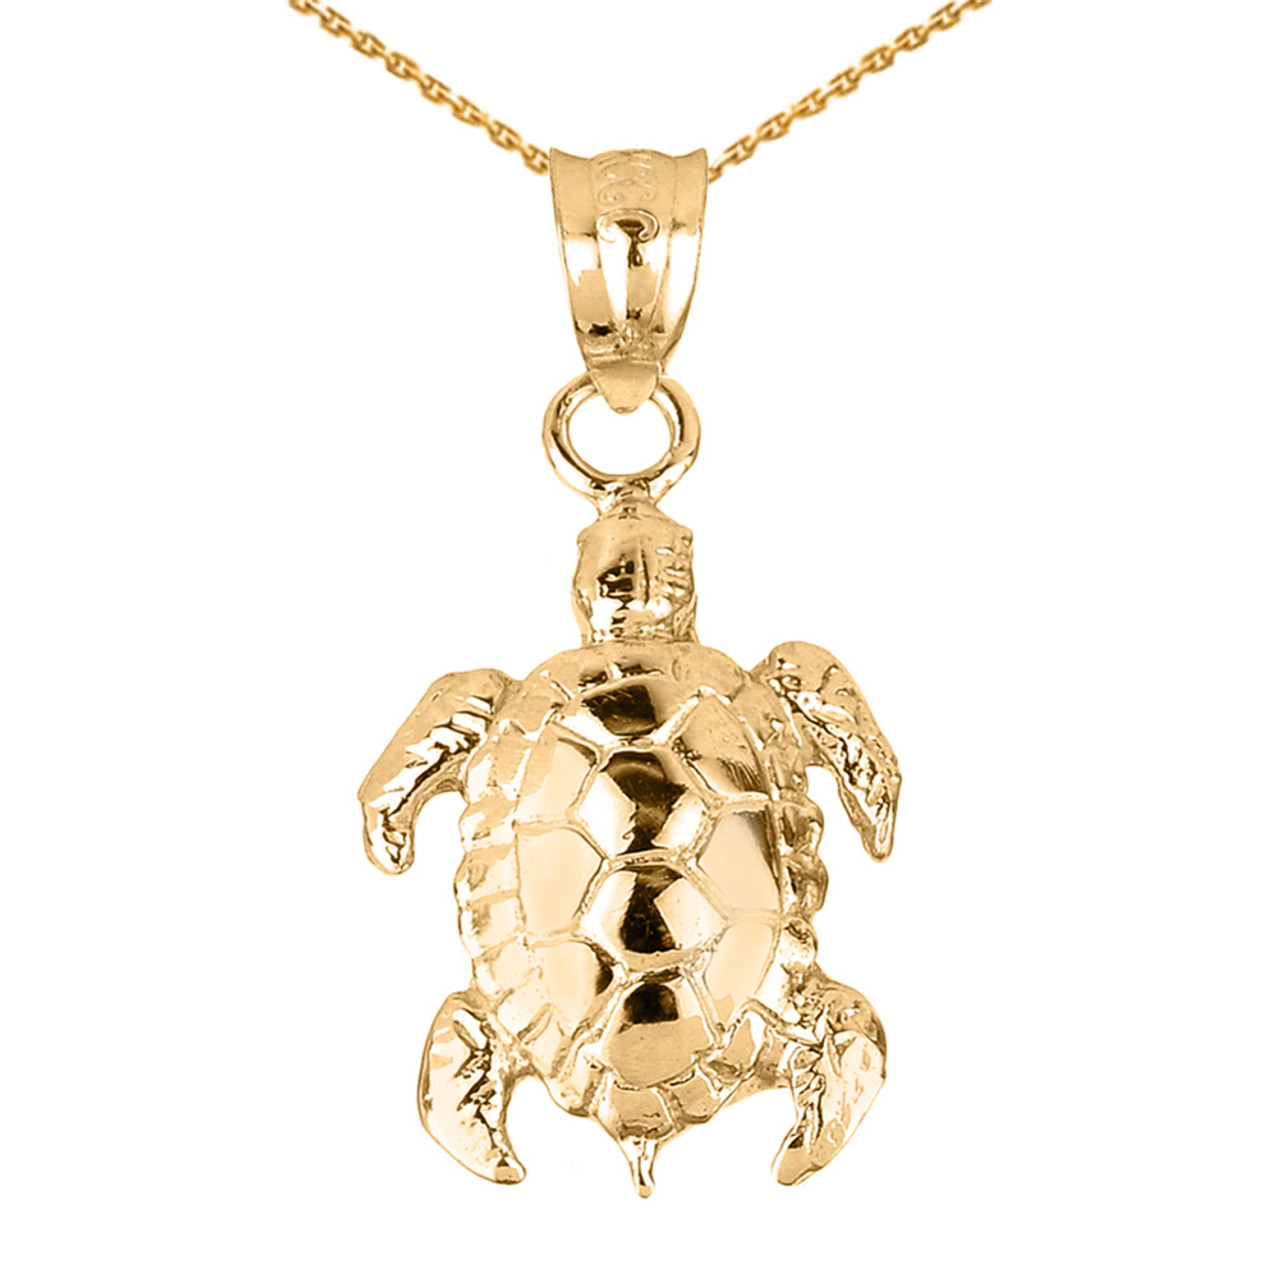 Solid Gold Detailed Shell Turtle Charm Pendant Necklace | eBay